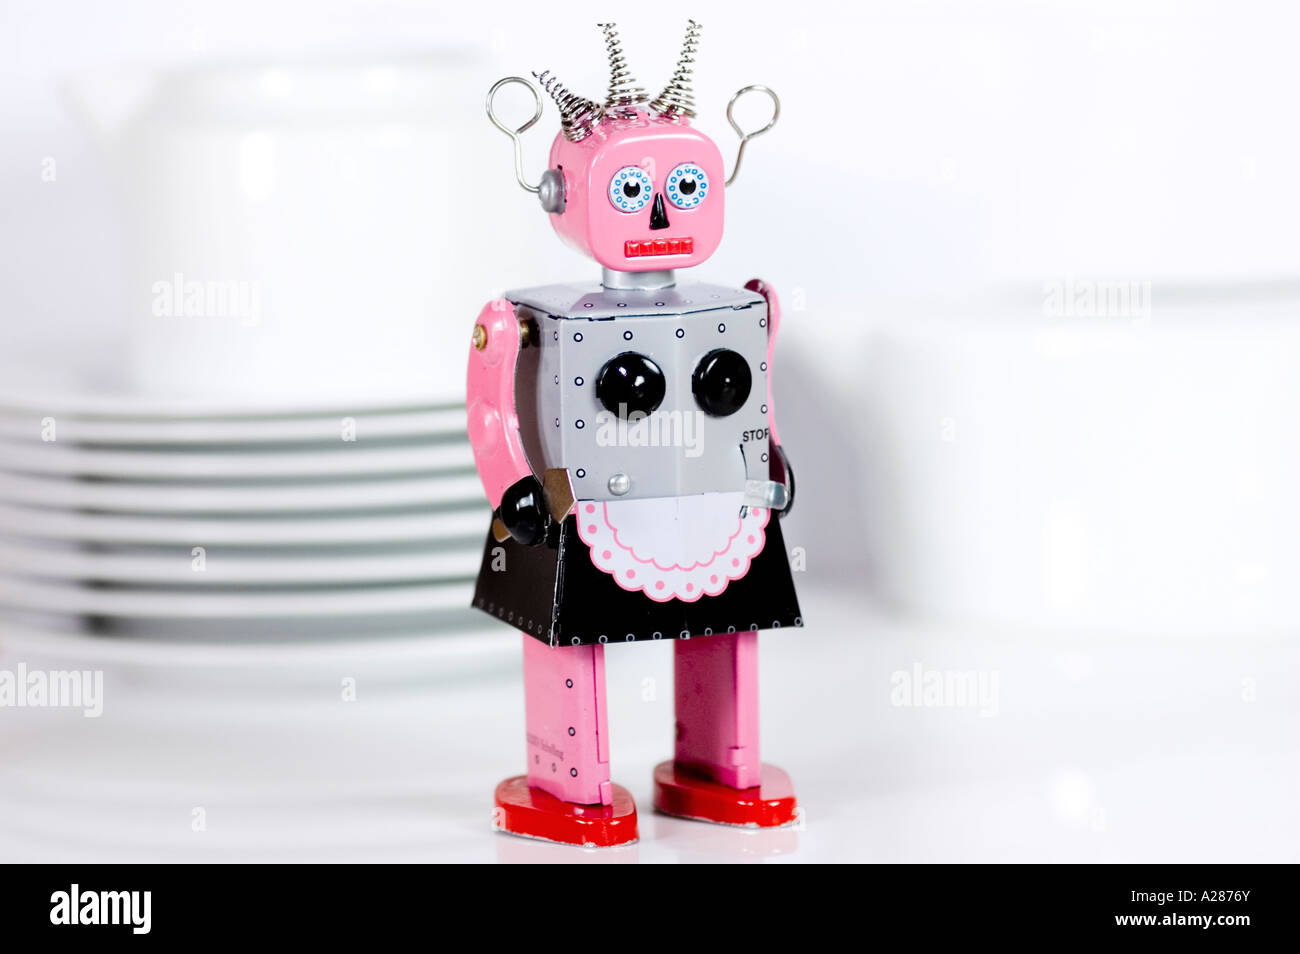 Female tin toy robot standing in front of dishes Stock Photo